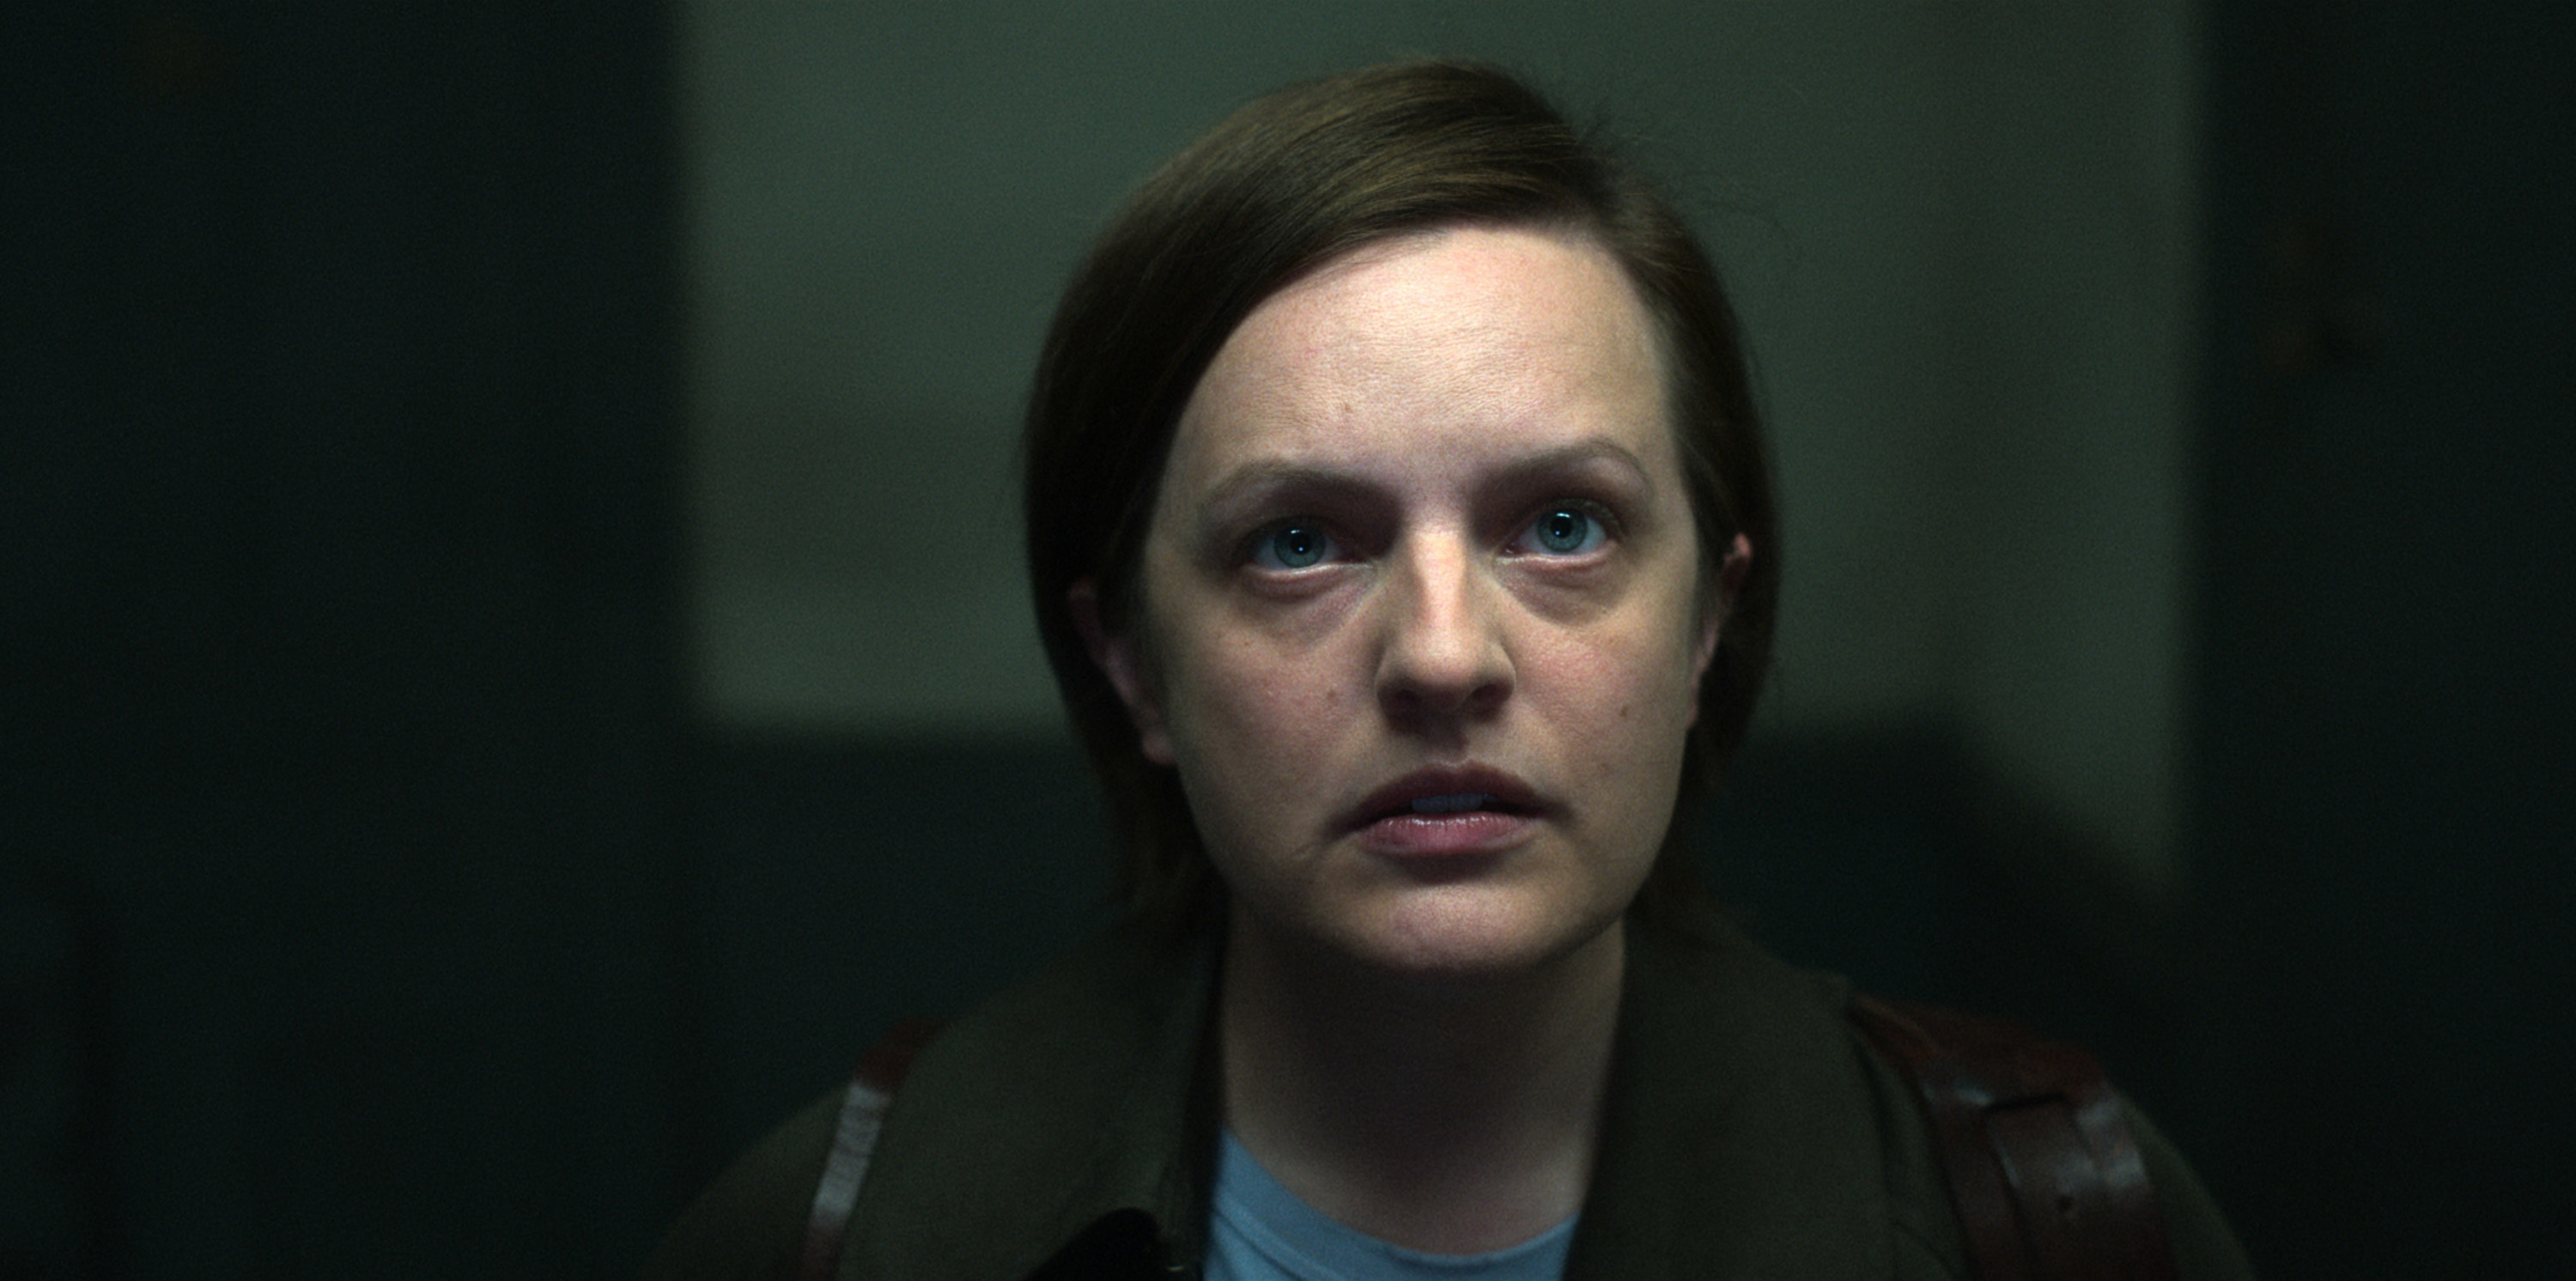 Elisabeth Moss looks at the camera